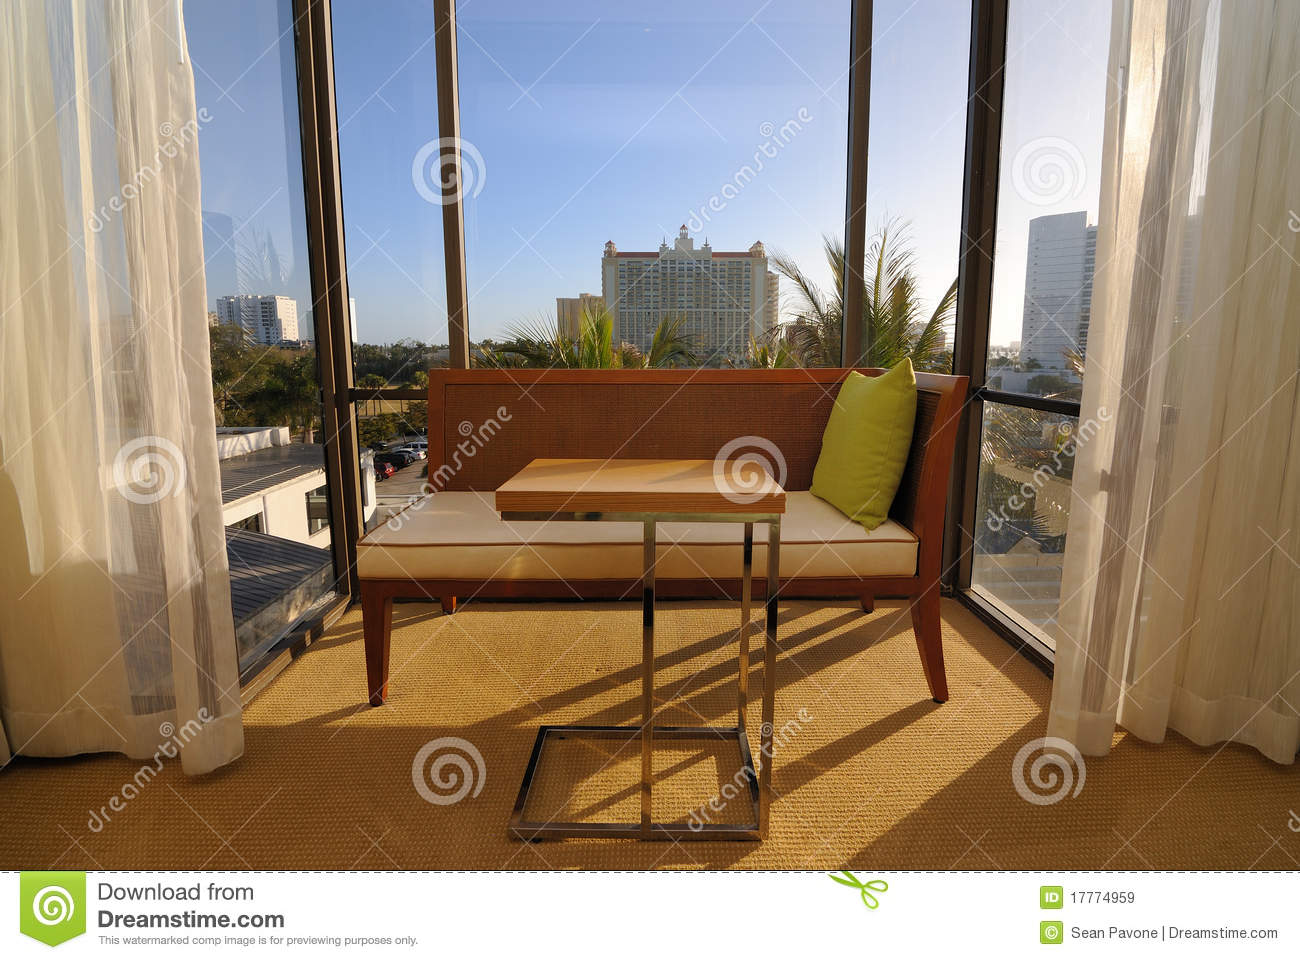 Bay Window And Seat Royalty Free Stock Images   Image  17774959